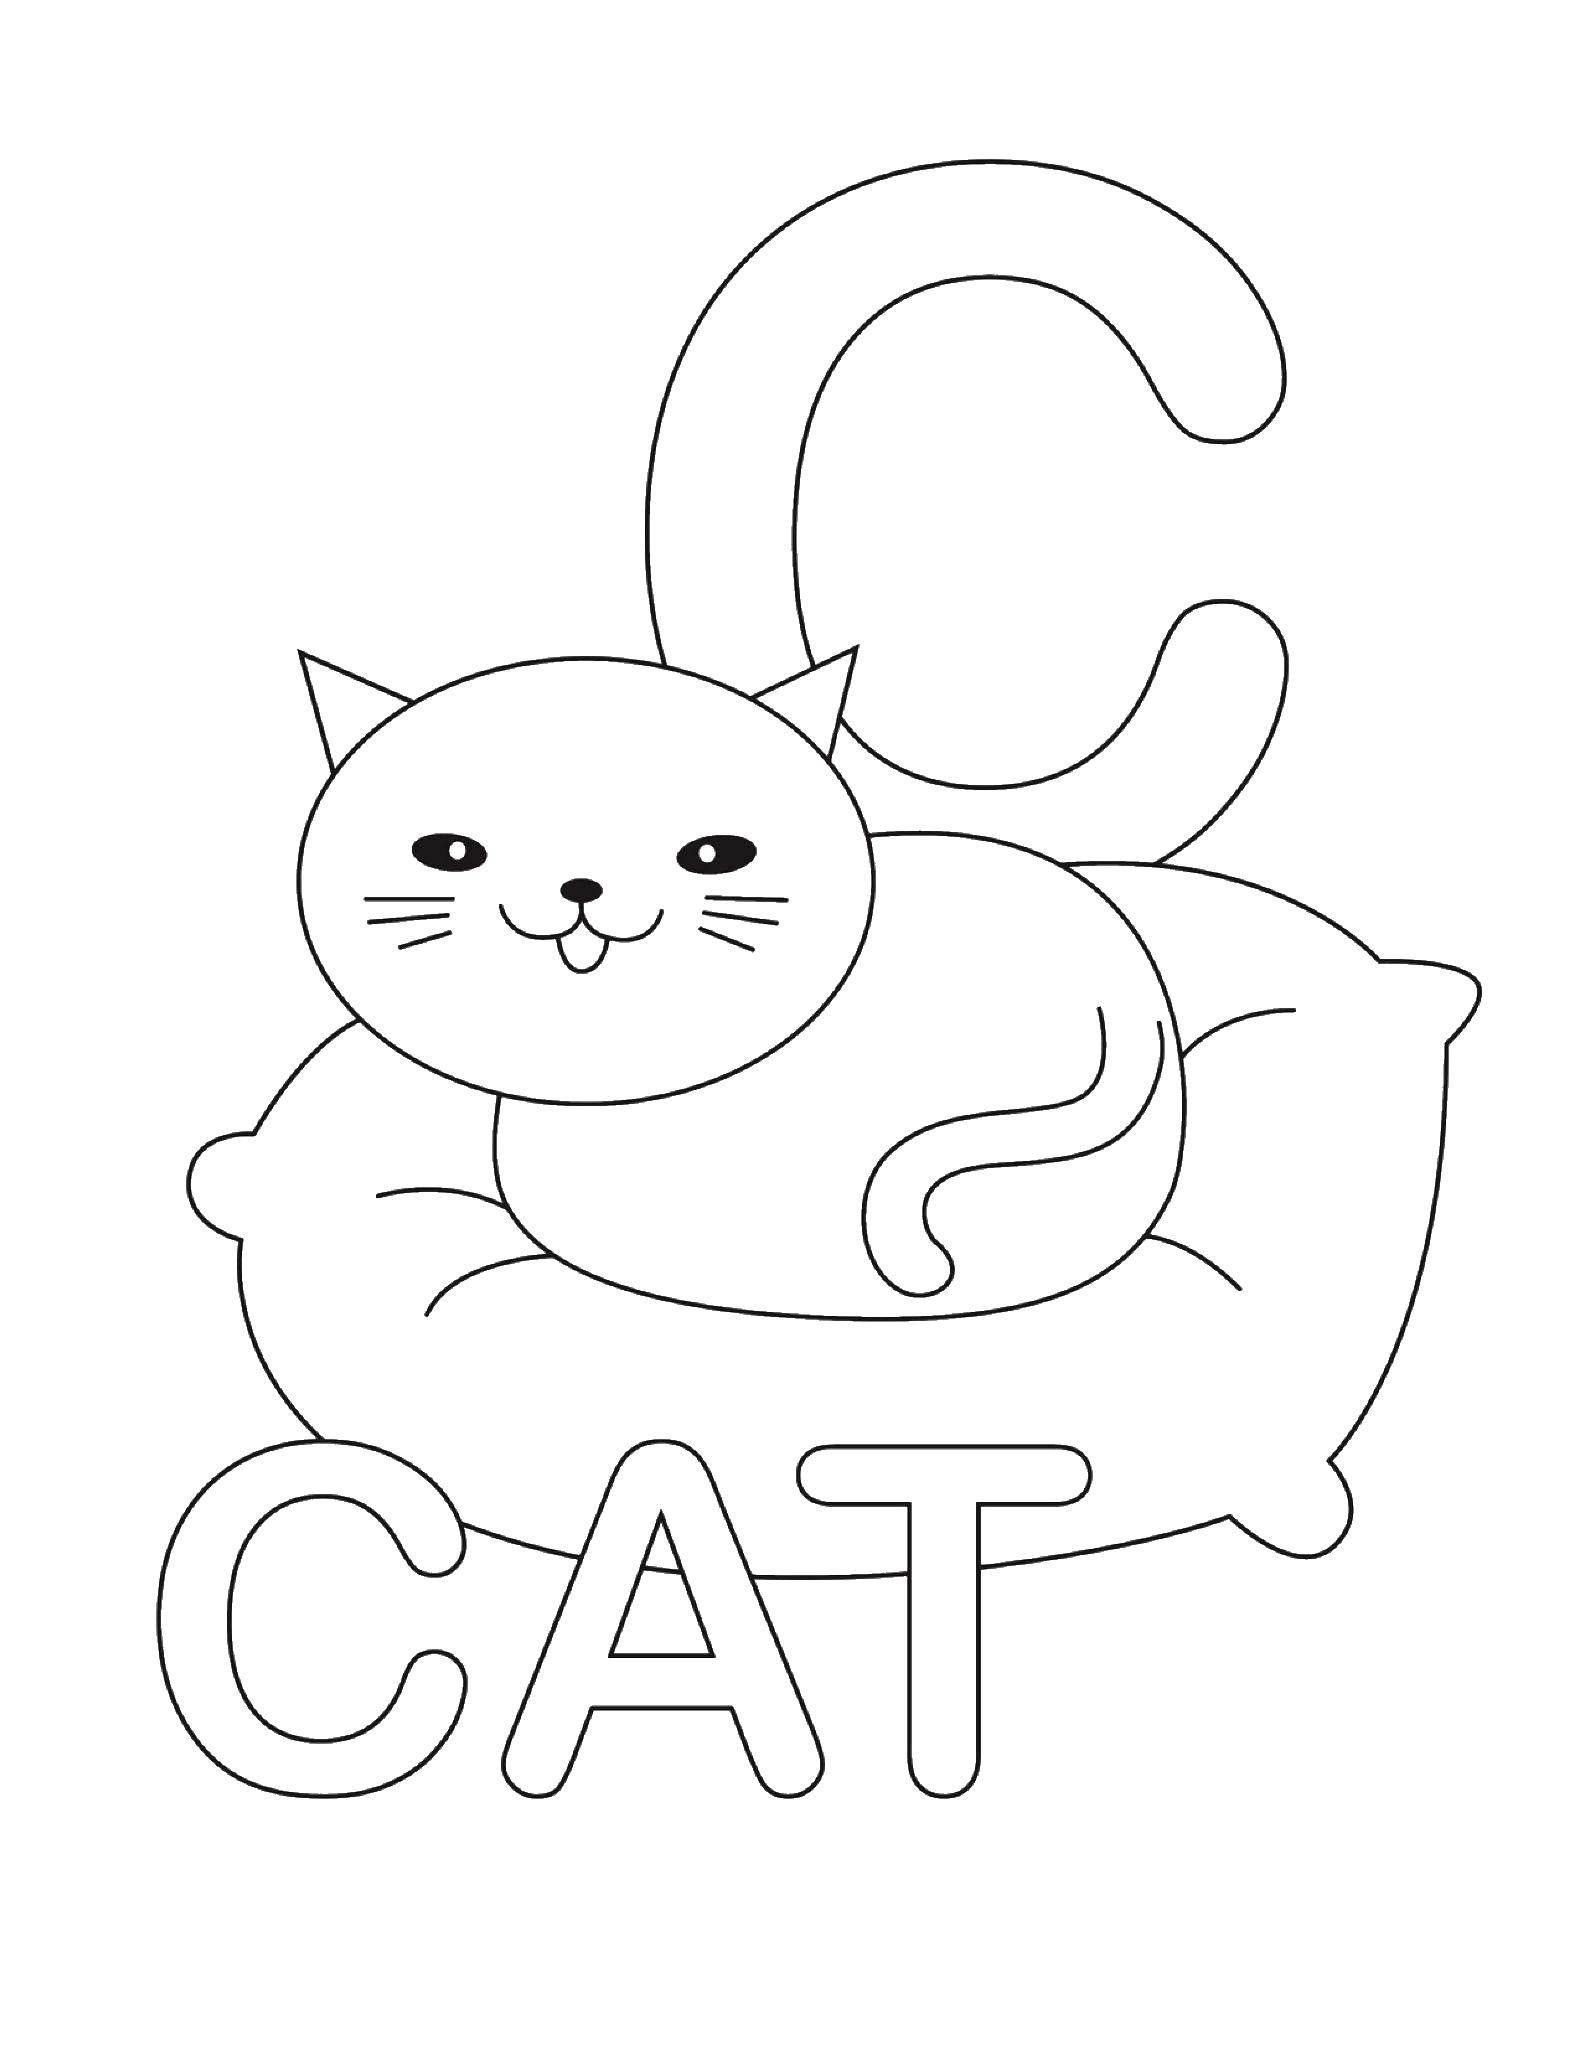 Coloring To cat. Category English words. Tags:  English.